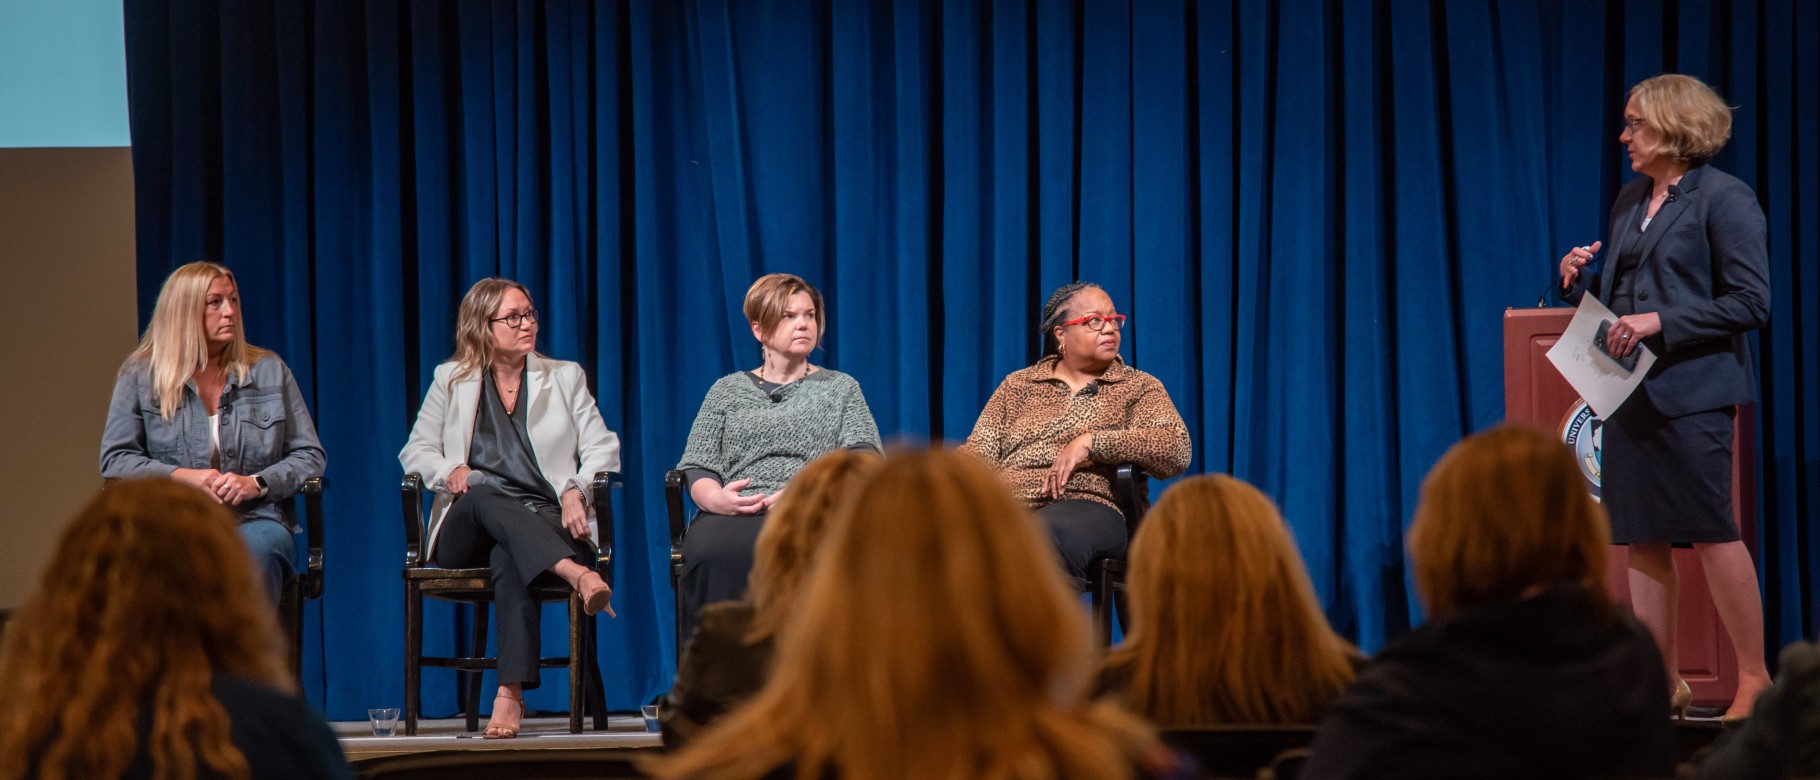 Photo shows five women on stage, four sit in chairs and another stands to moderate a panel discussion